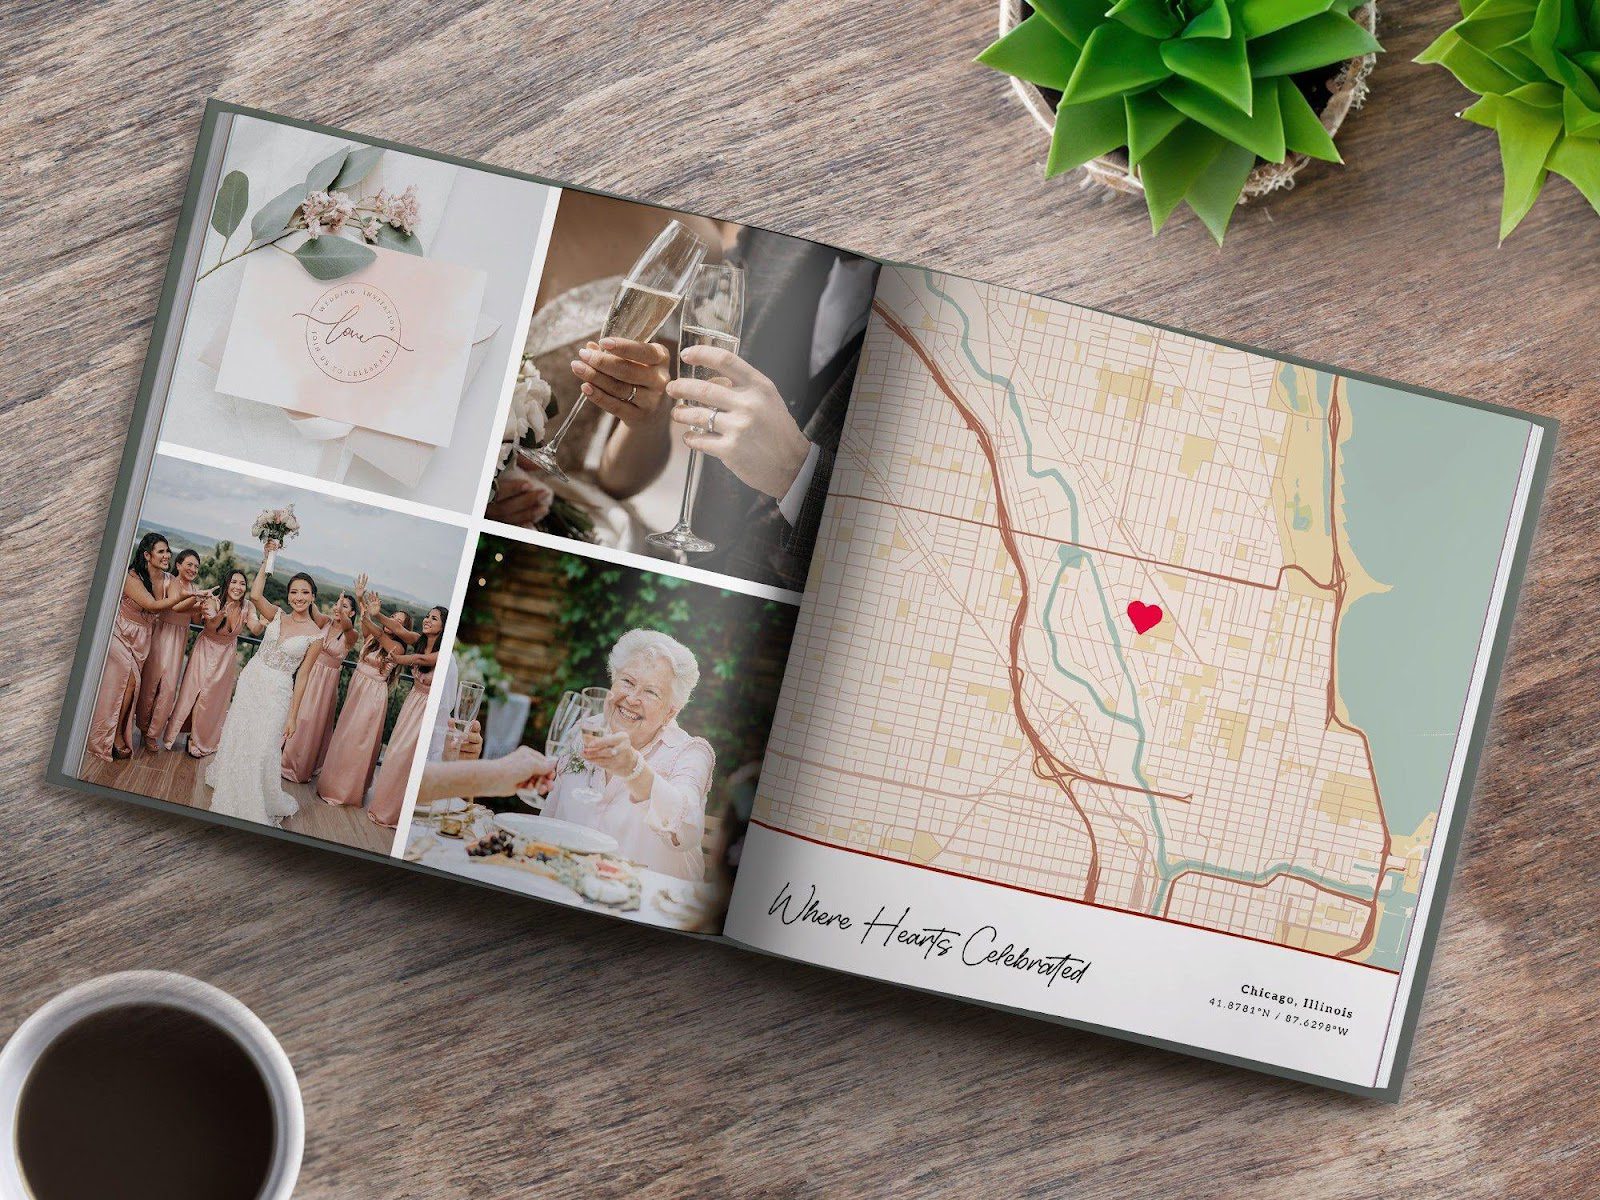 MixPlaces' Innovative Approach to Immersive Travel Photo Books